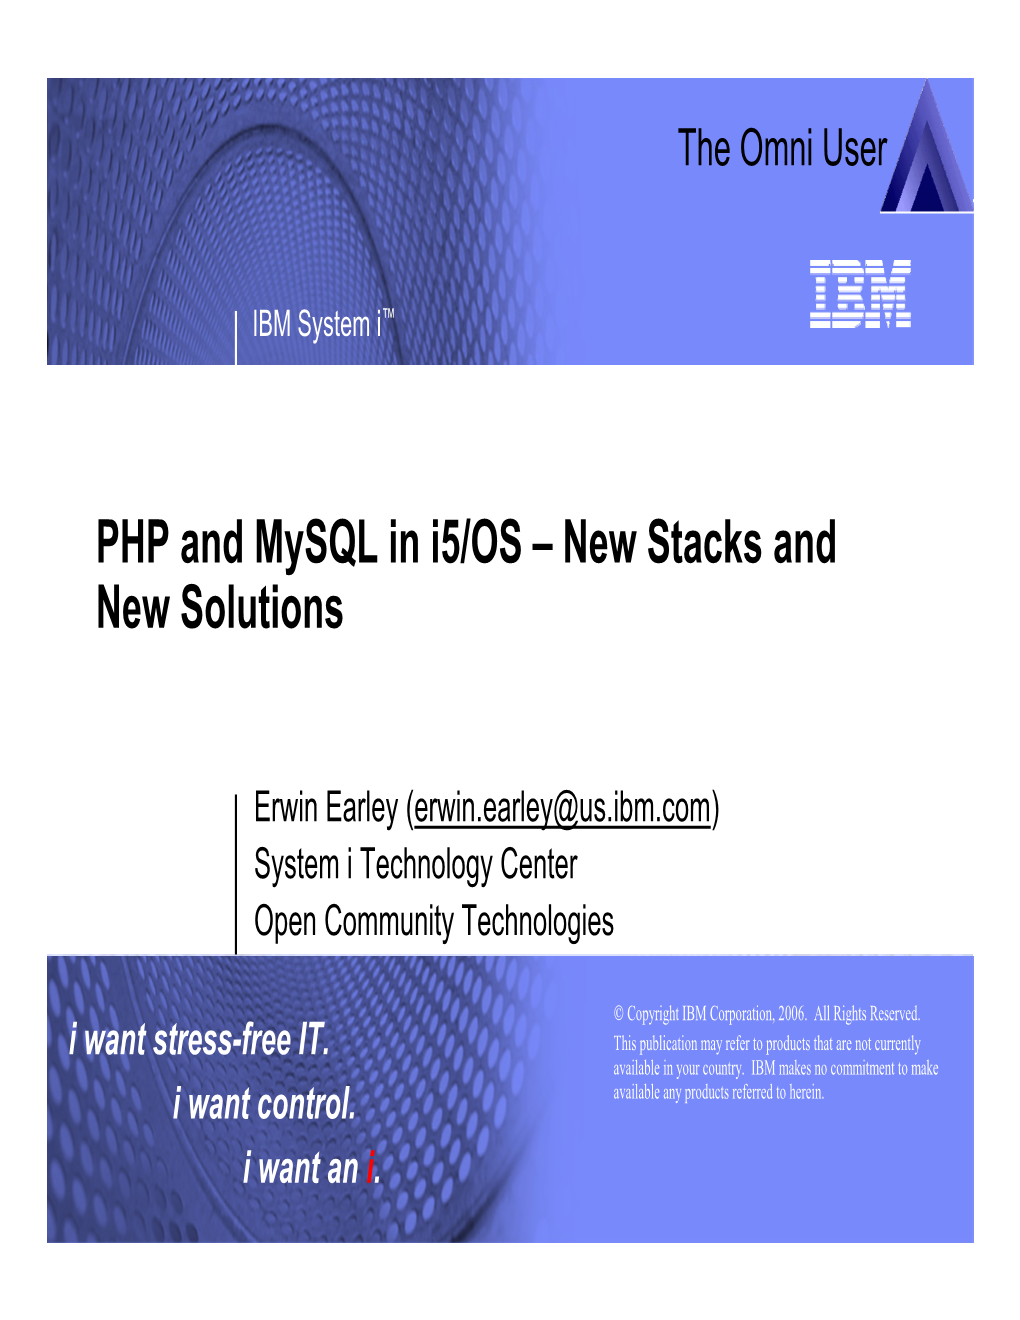 PHP and Mysql in I5/OS – New Stacks and New Solutions